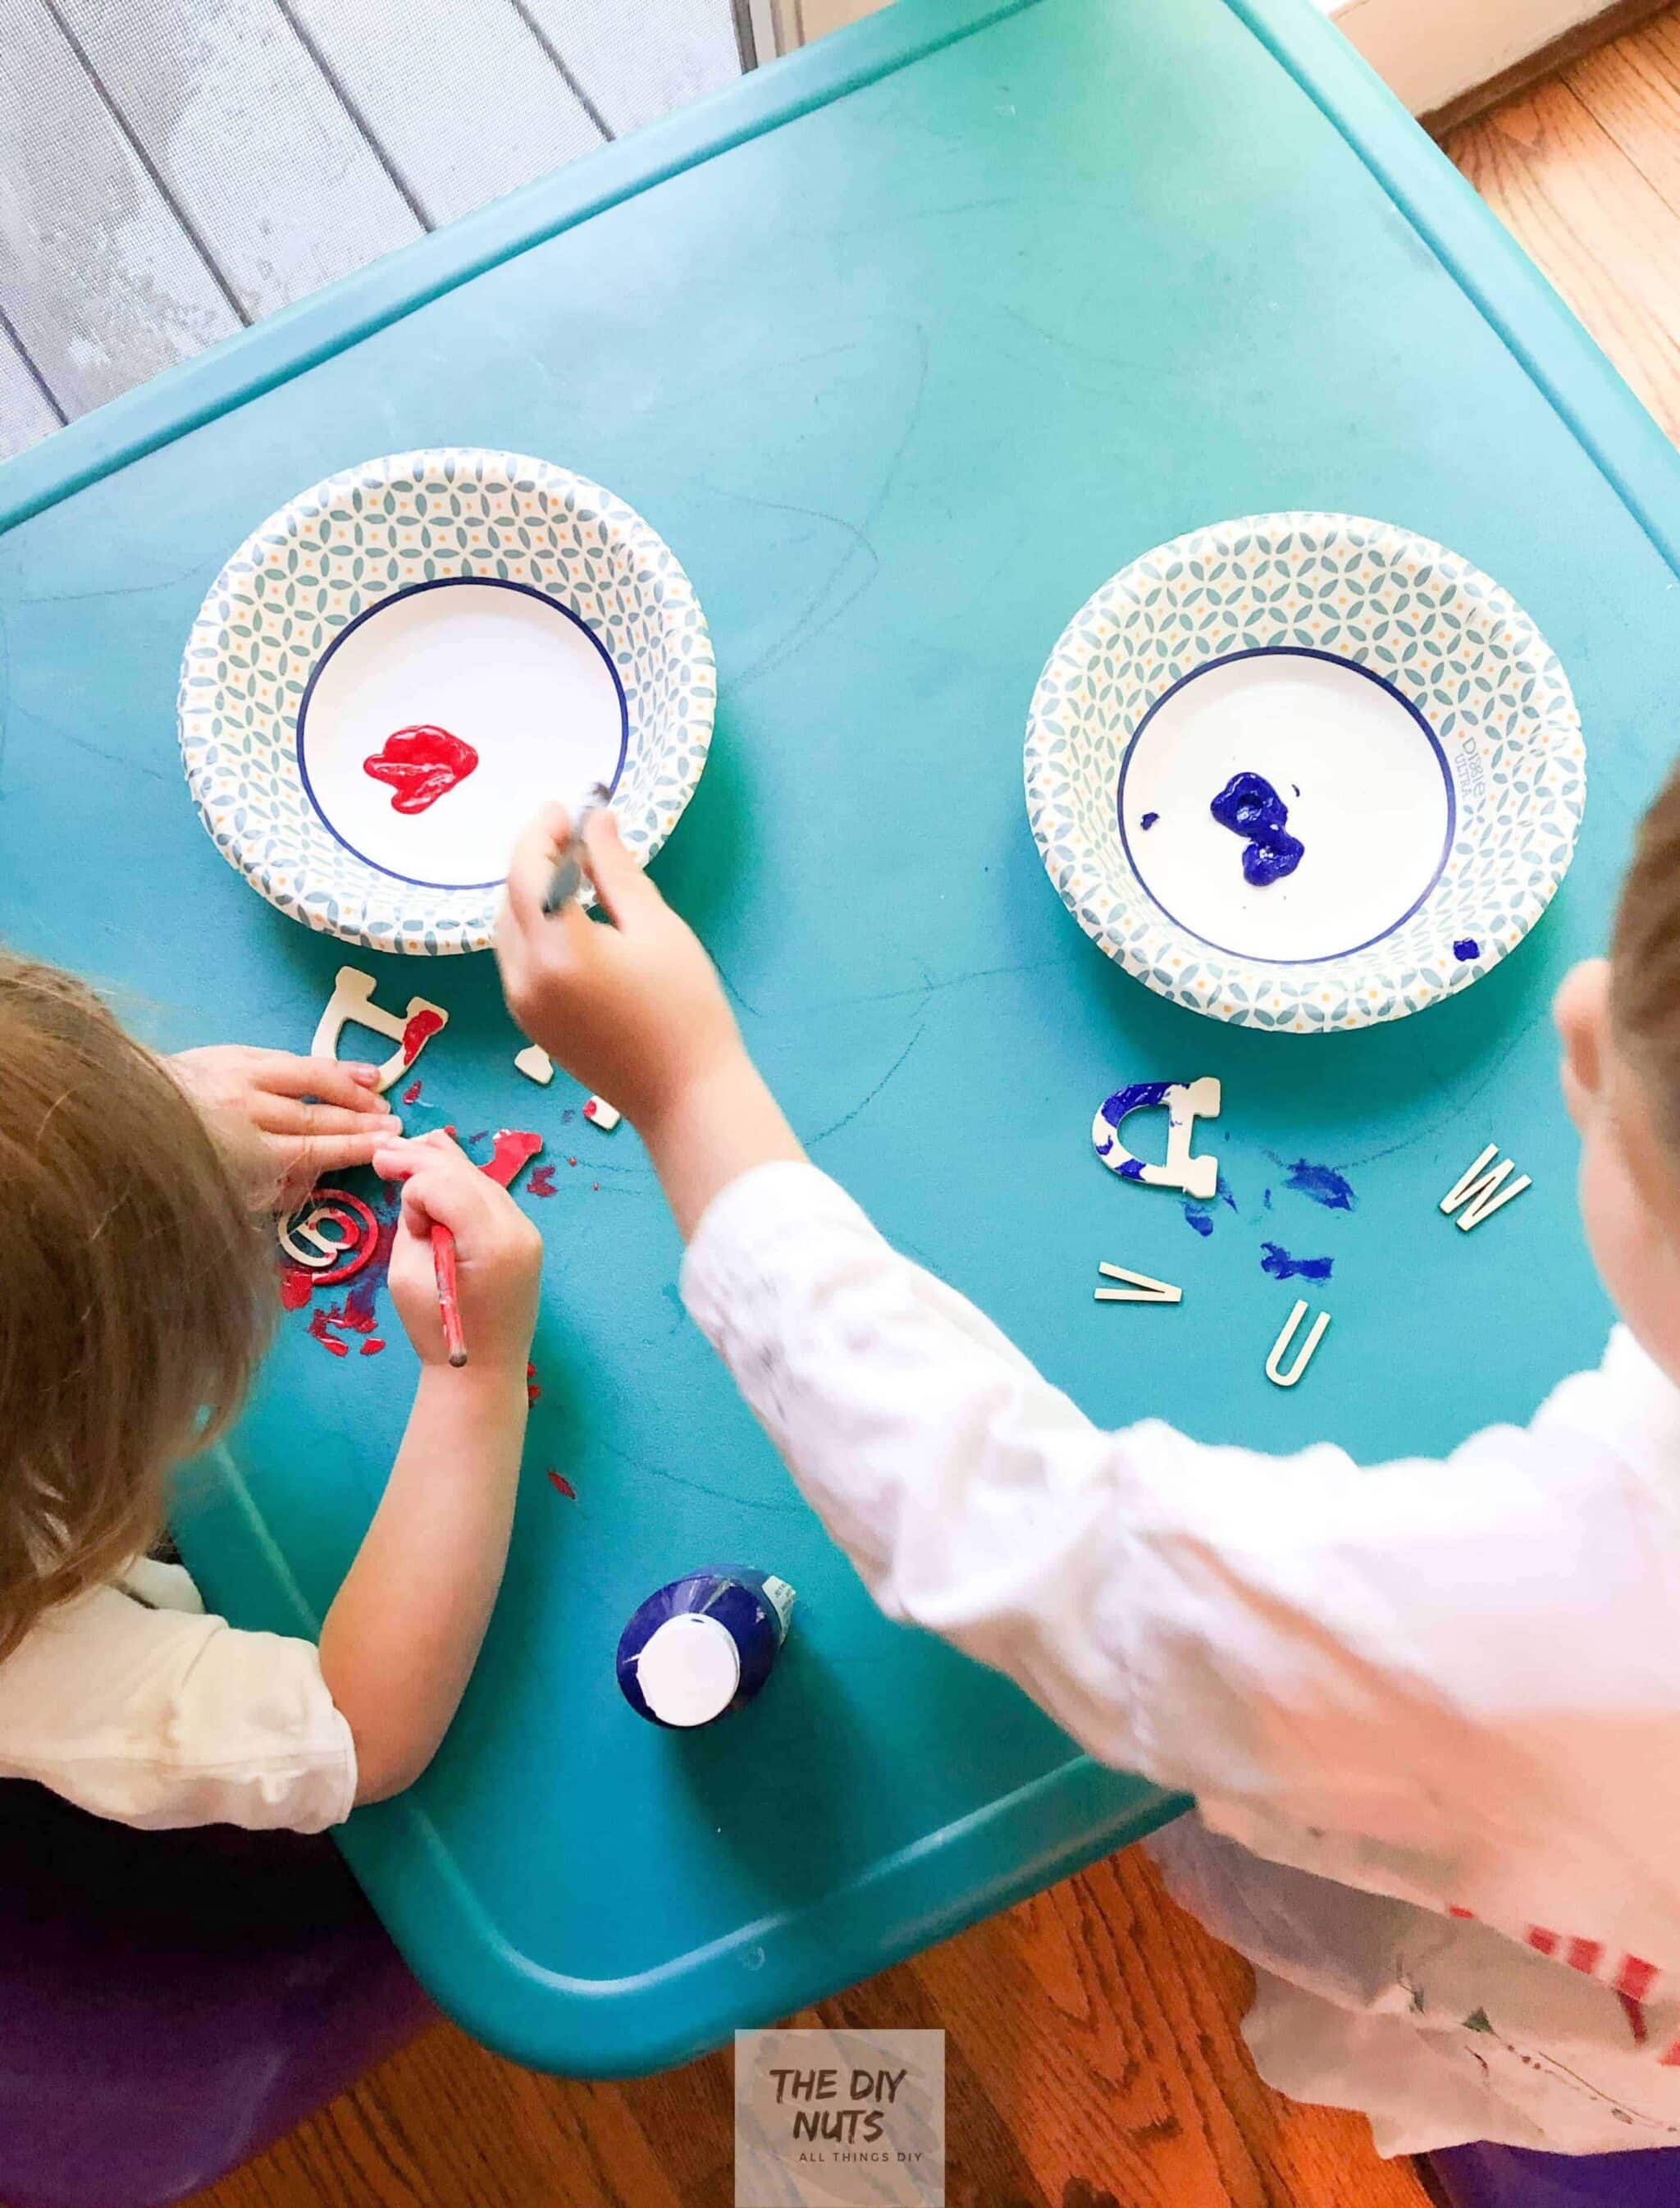 Children painting wooden letters for DIY word art canvas project